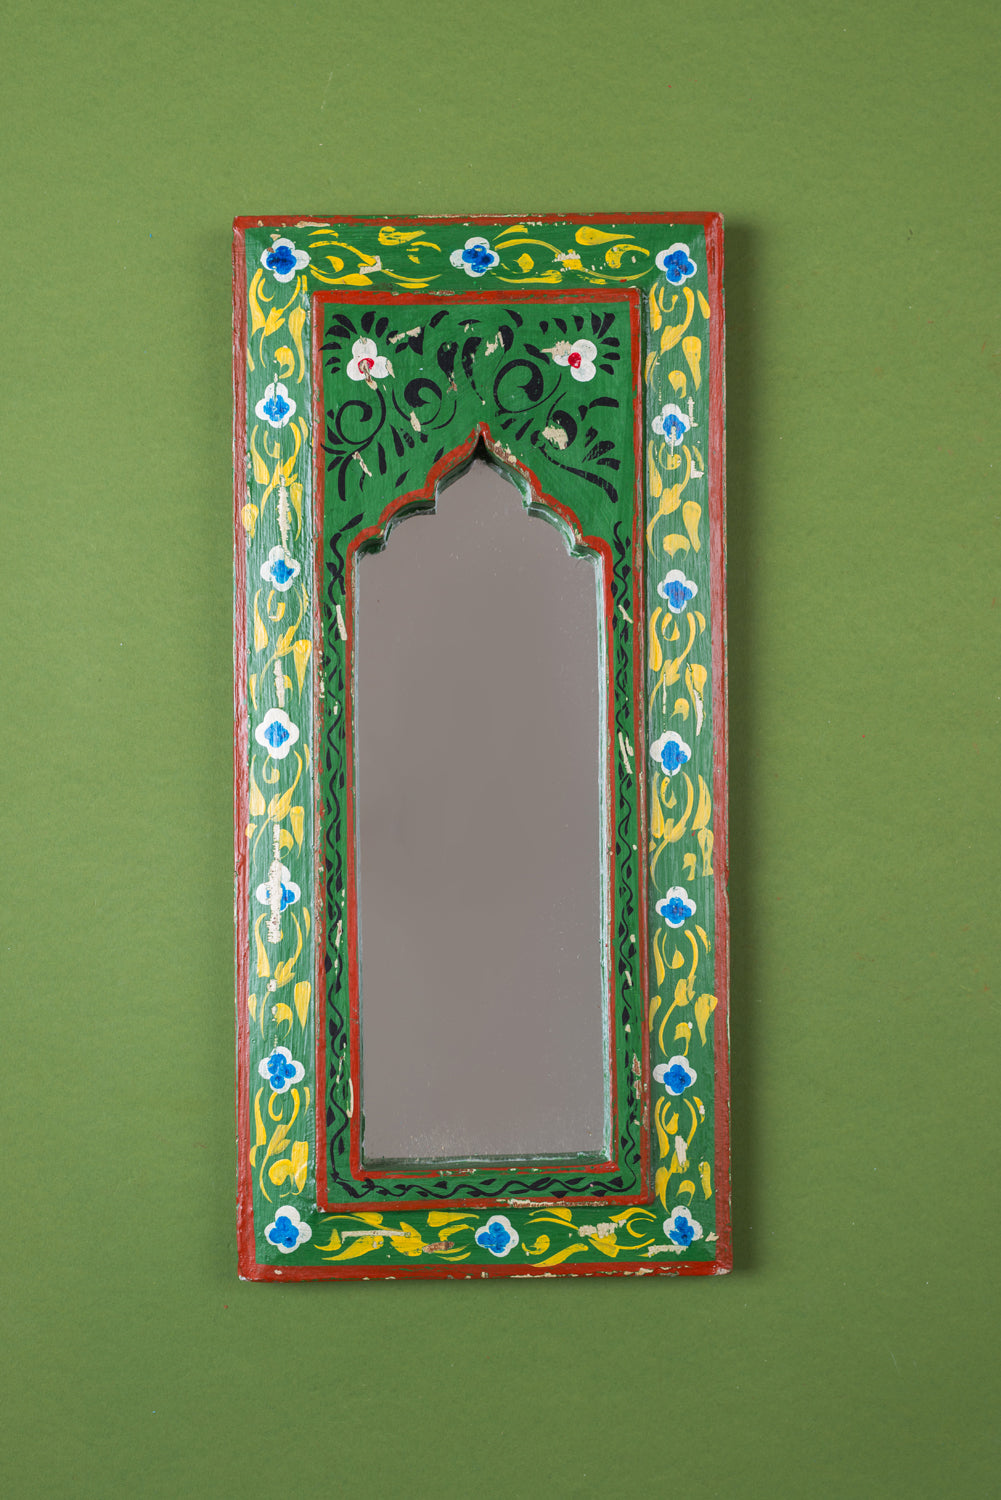 Hand Painted Vintage Arch Mirror (Re-worked) - 59